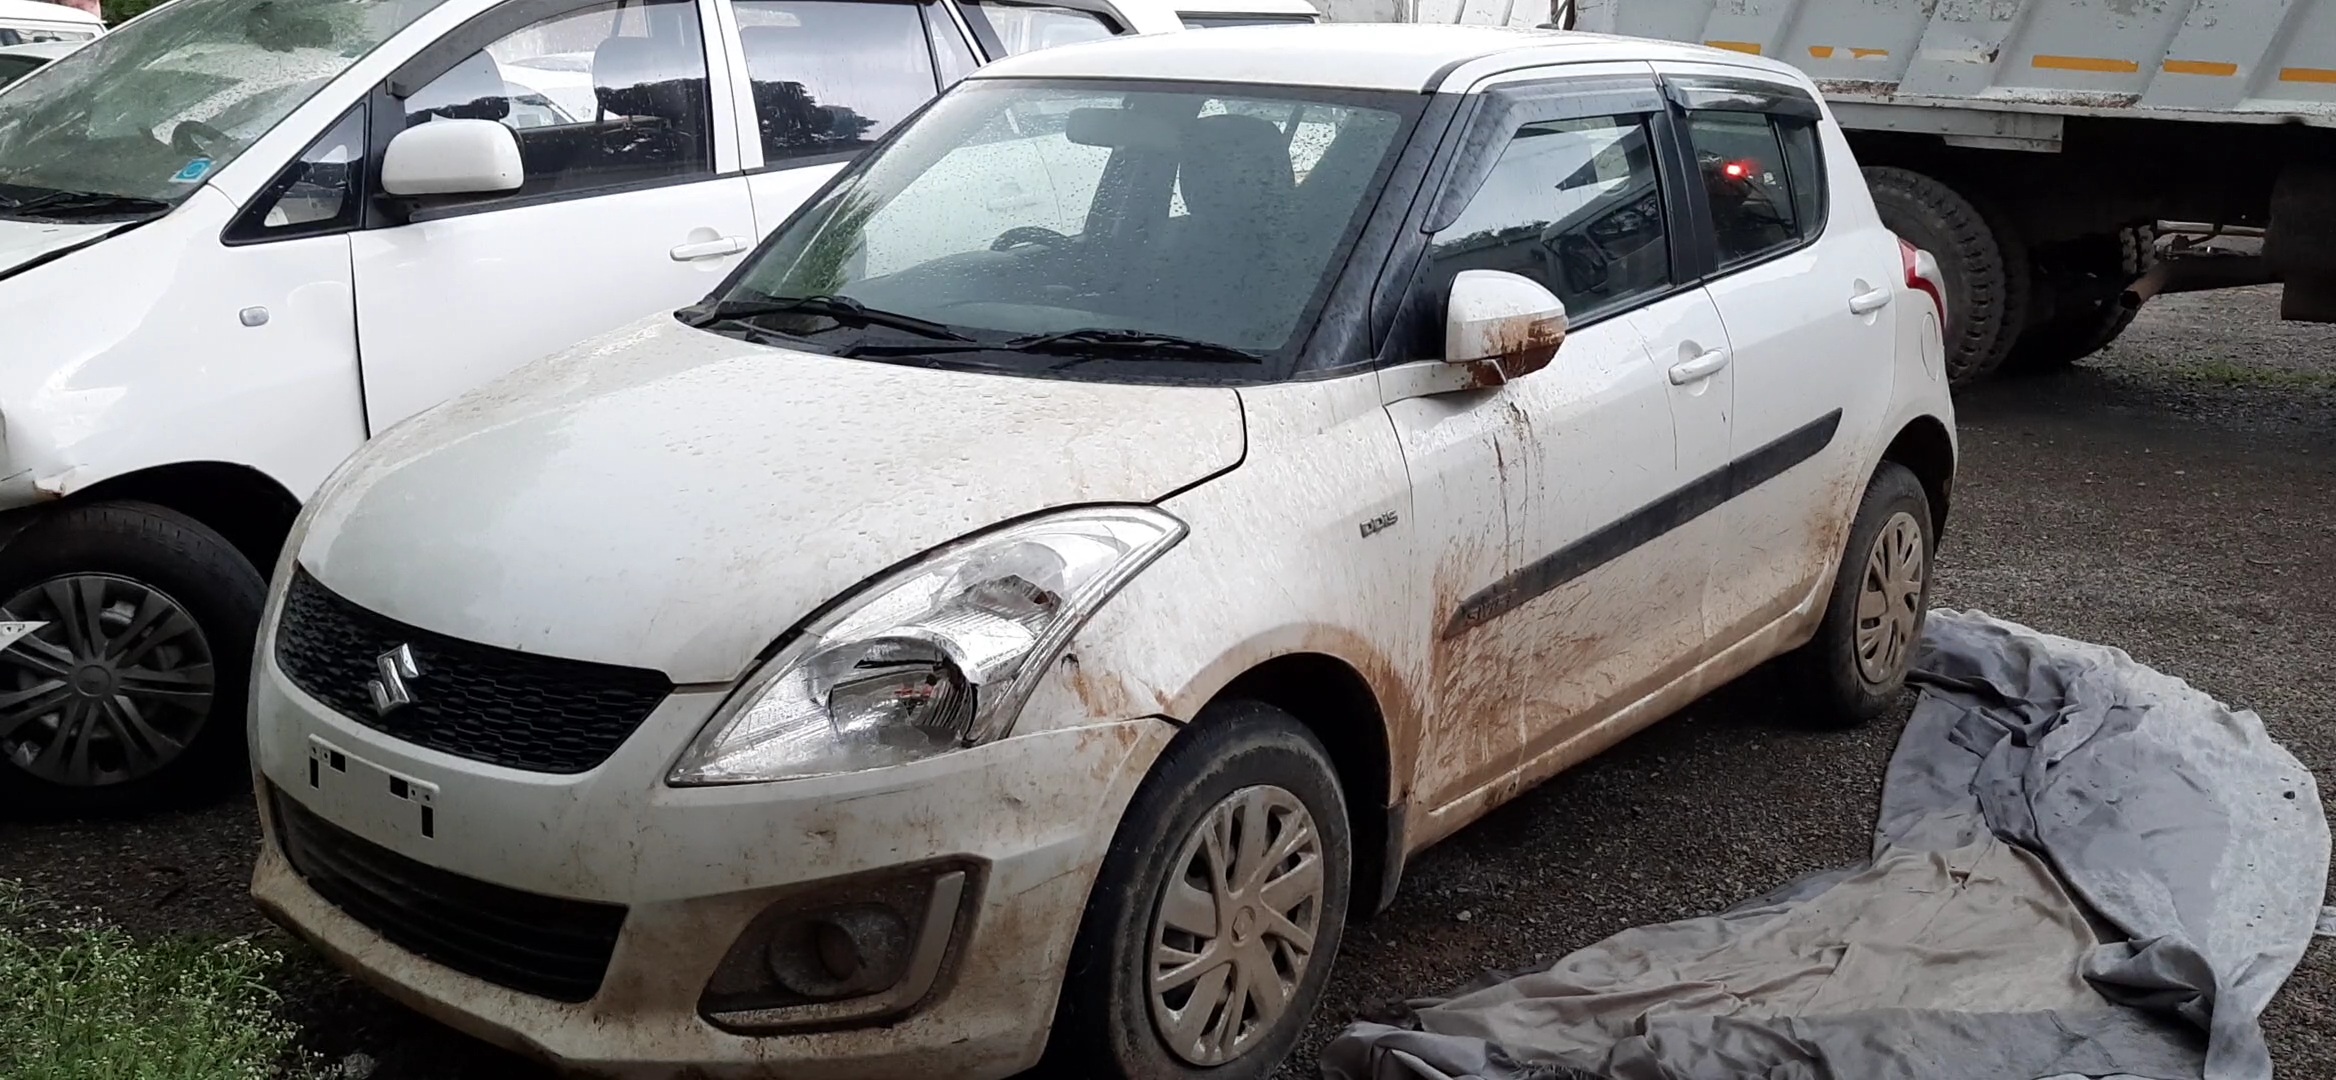 Car recovered from the possession of the accused